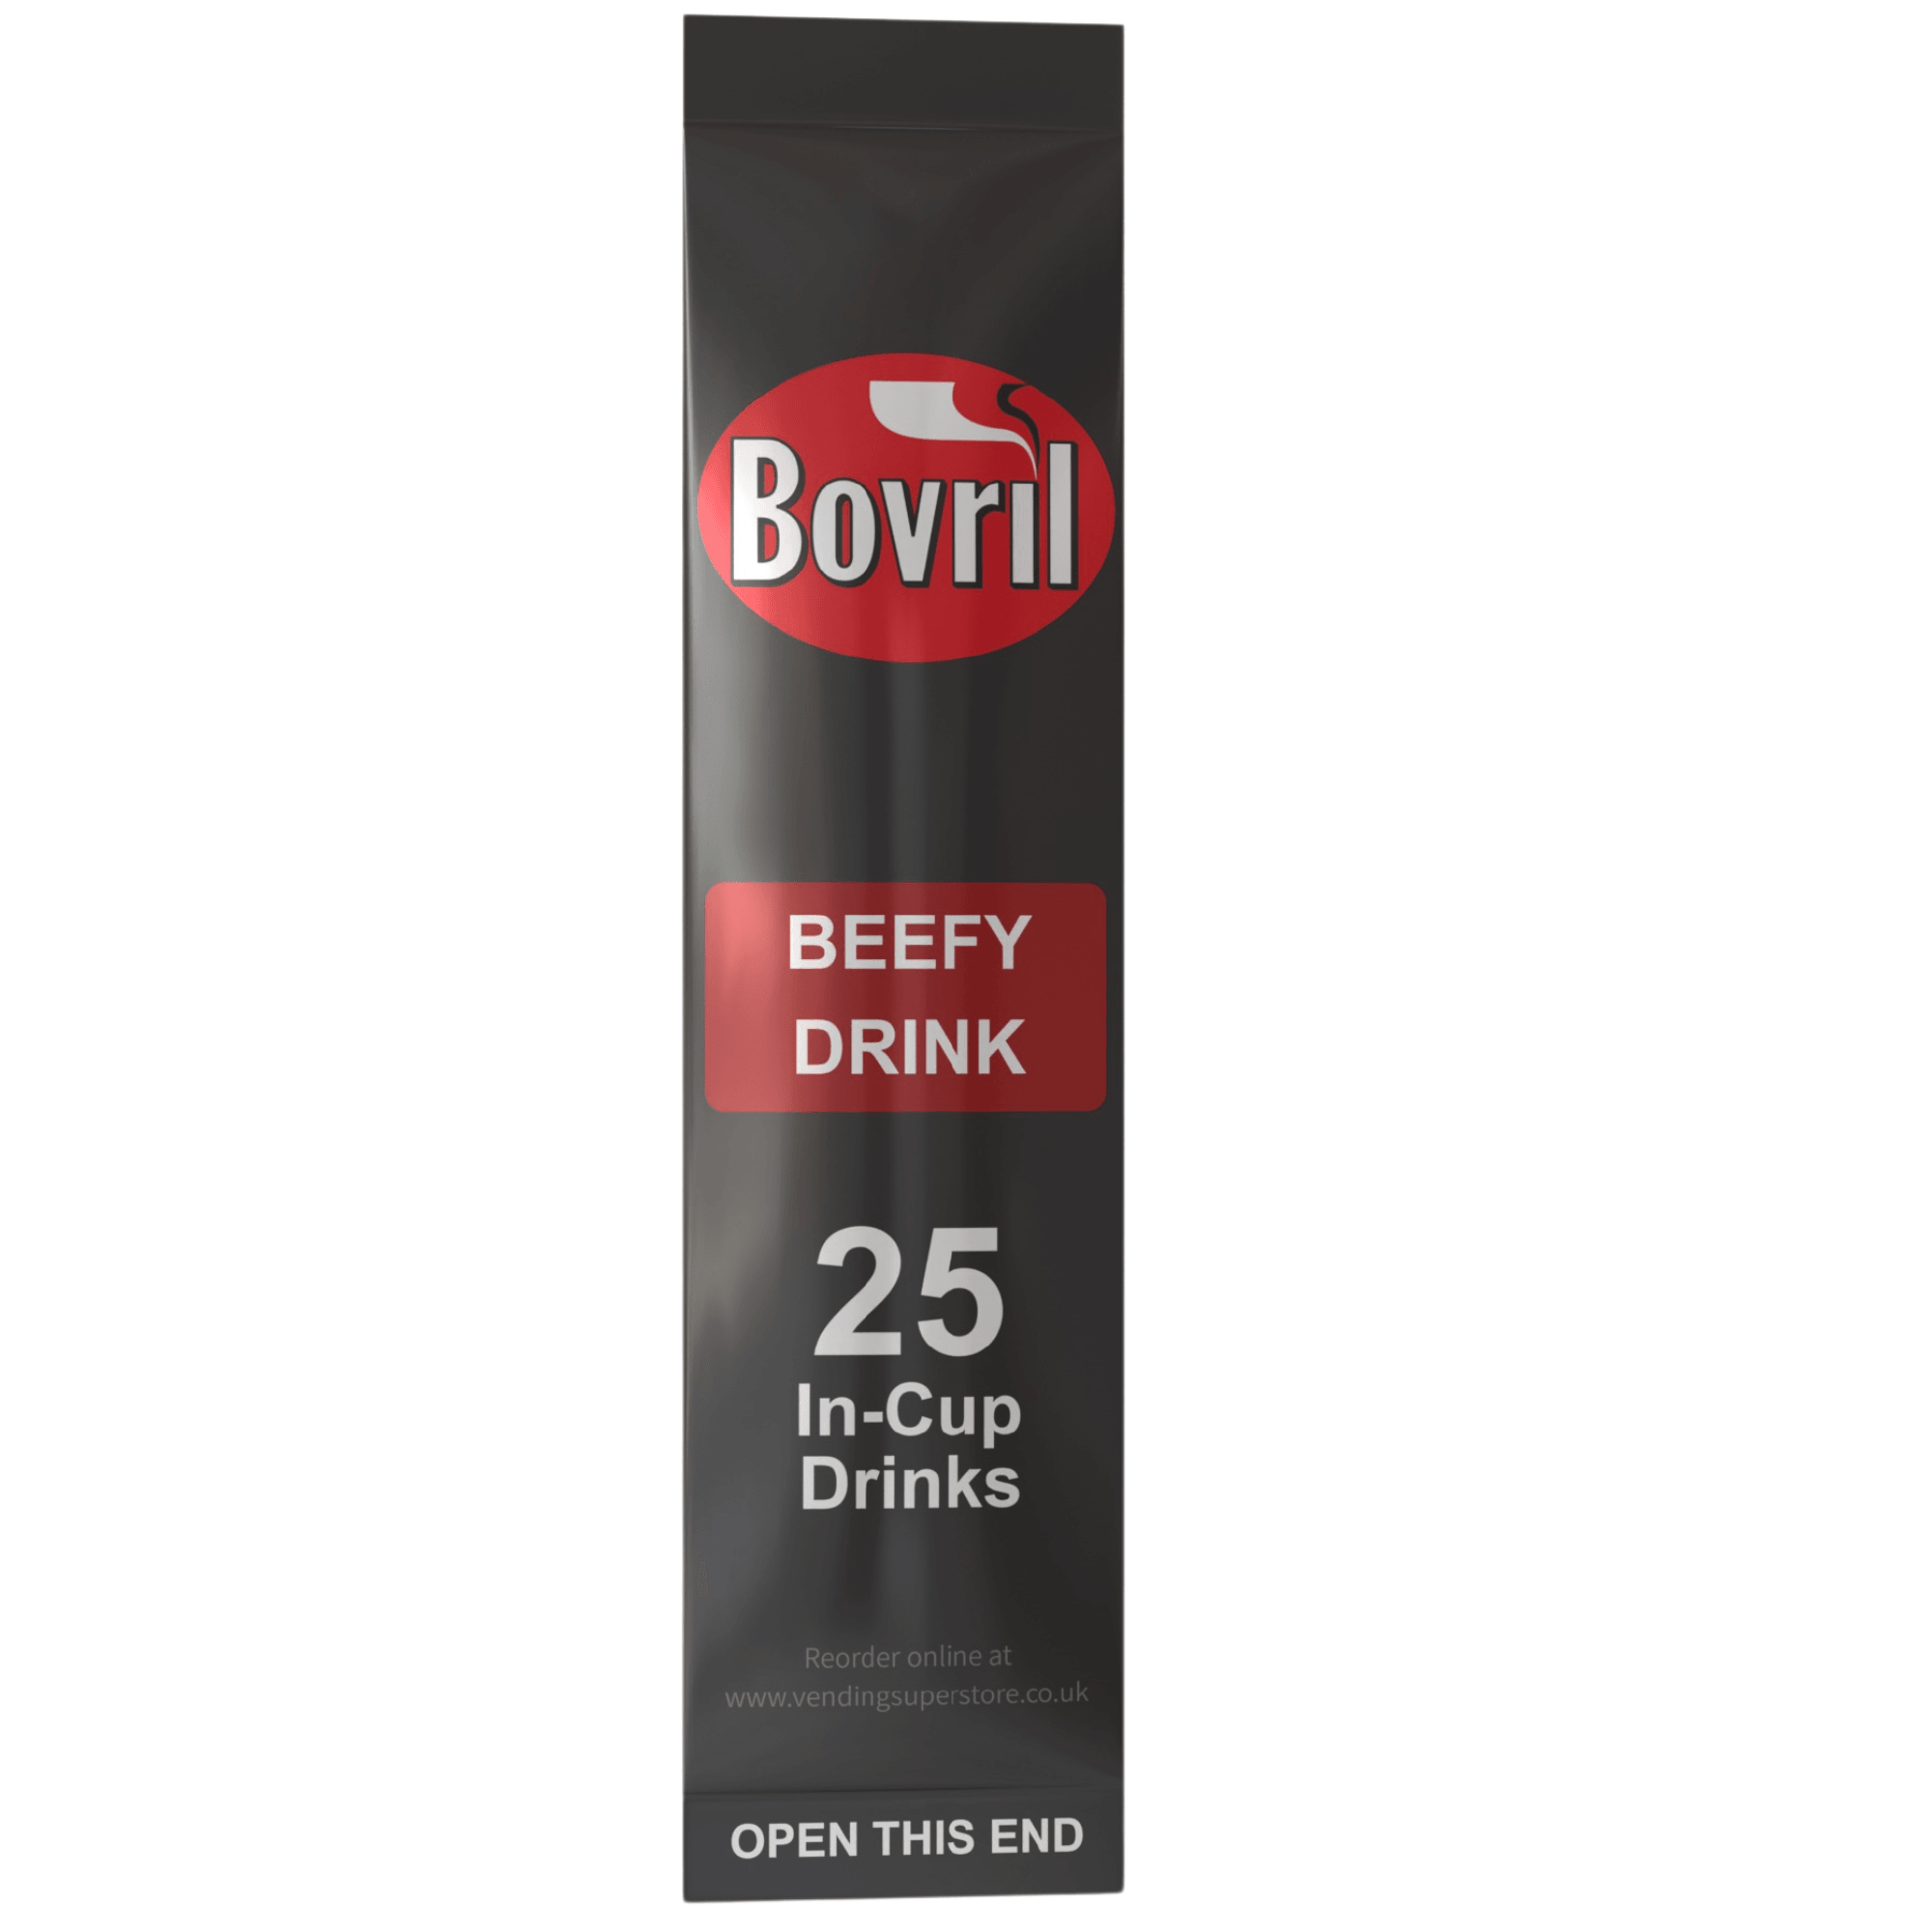 Incup Vending Drinks - Bovril Beefy Drink - Sleeve of 25 Cups - Vending Superstore